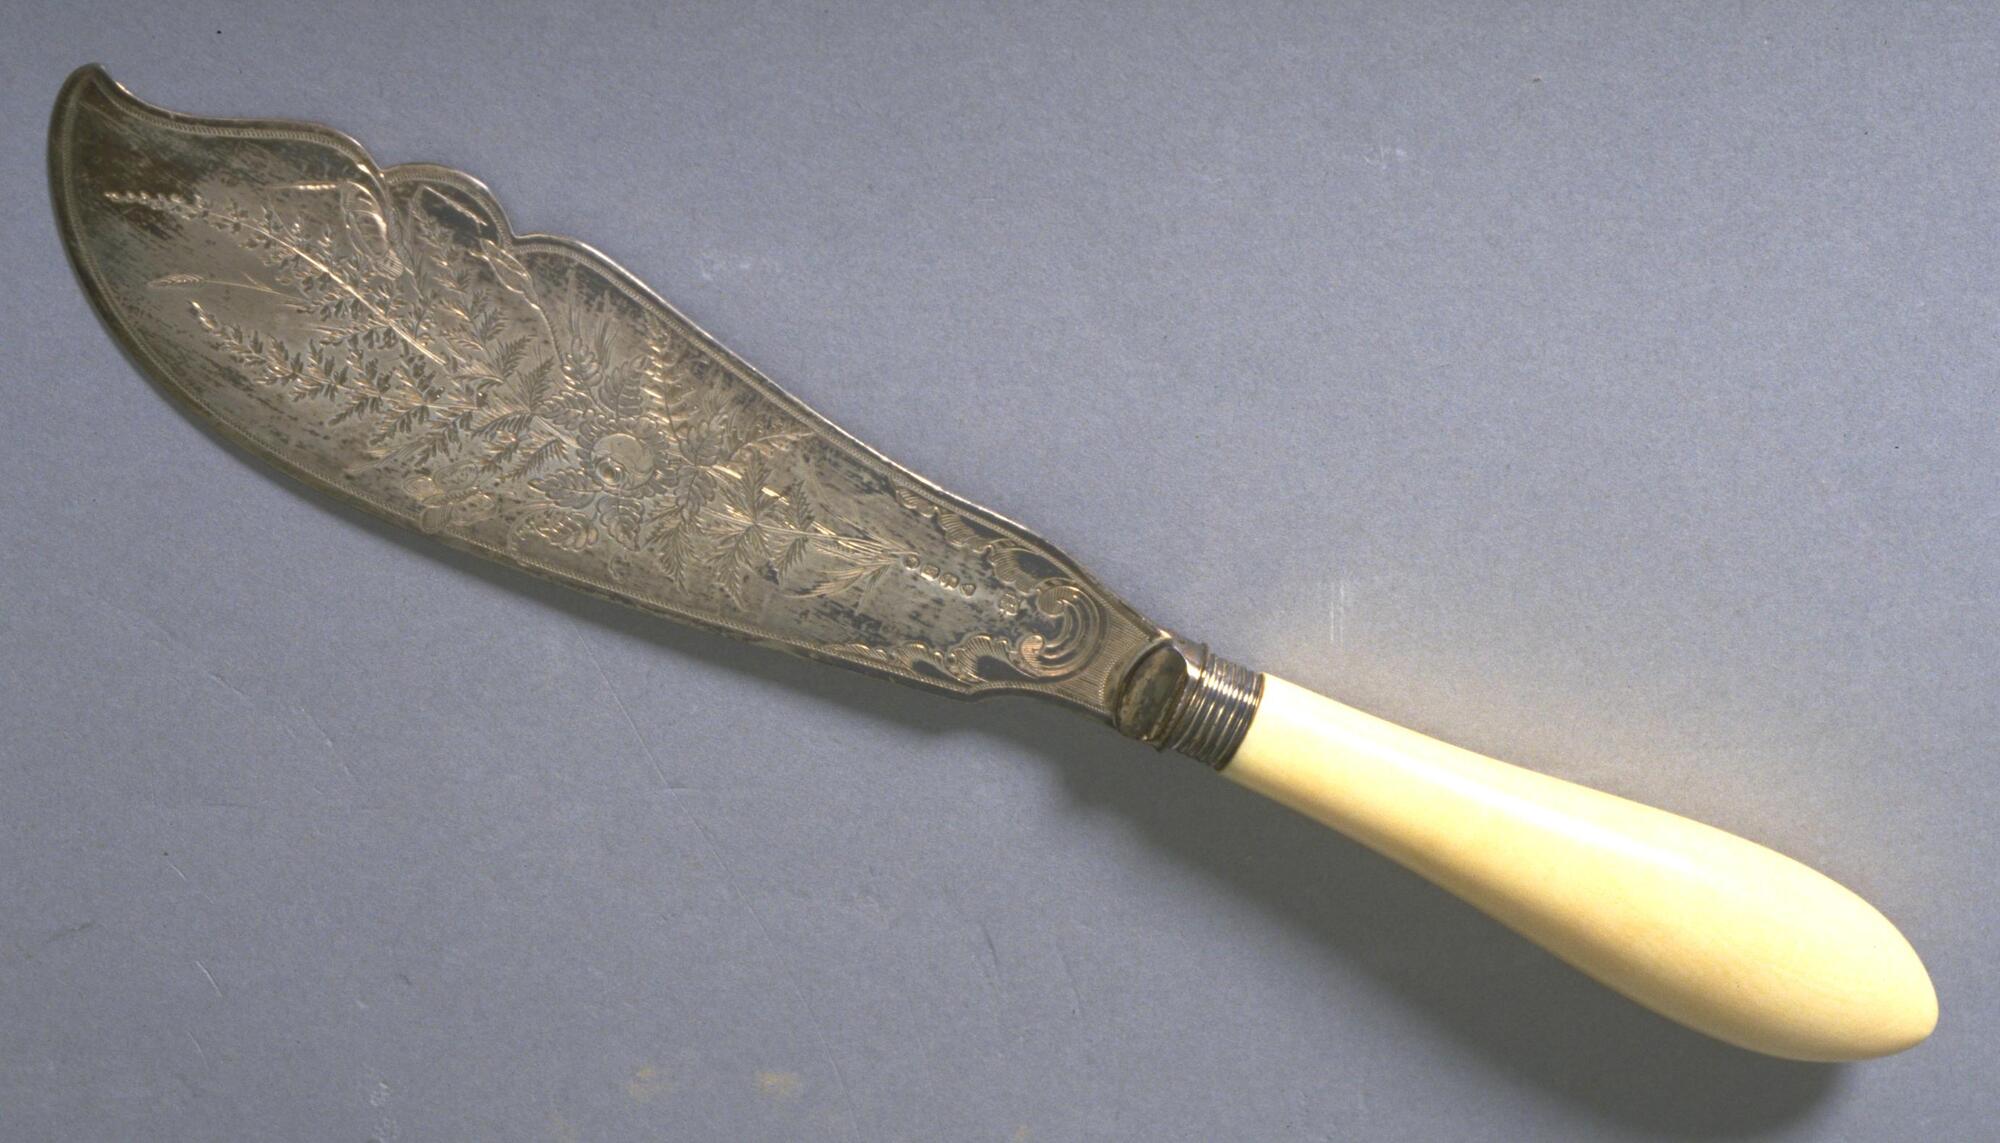 Knife engraved with leaf pattern and ivory handle